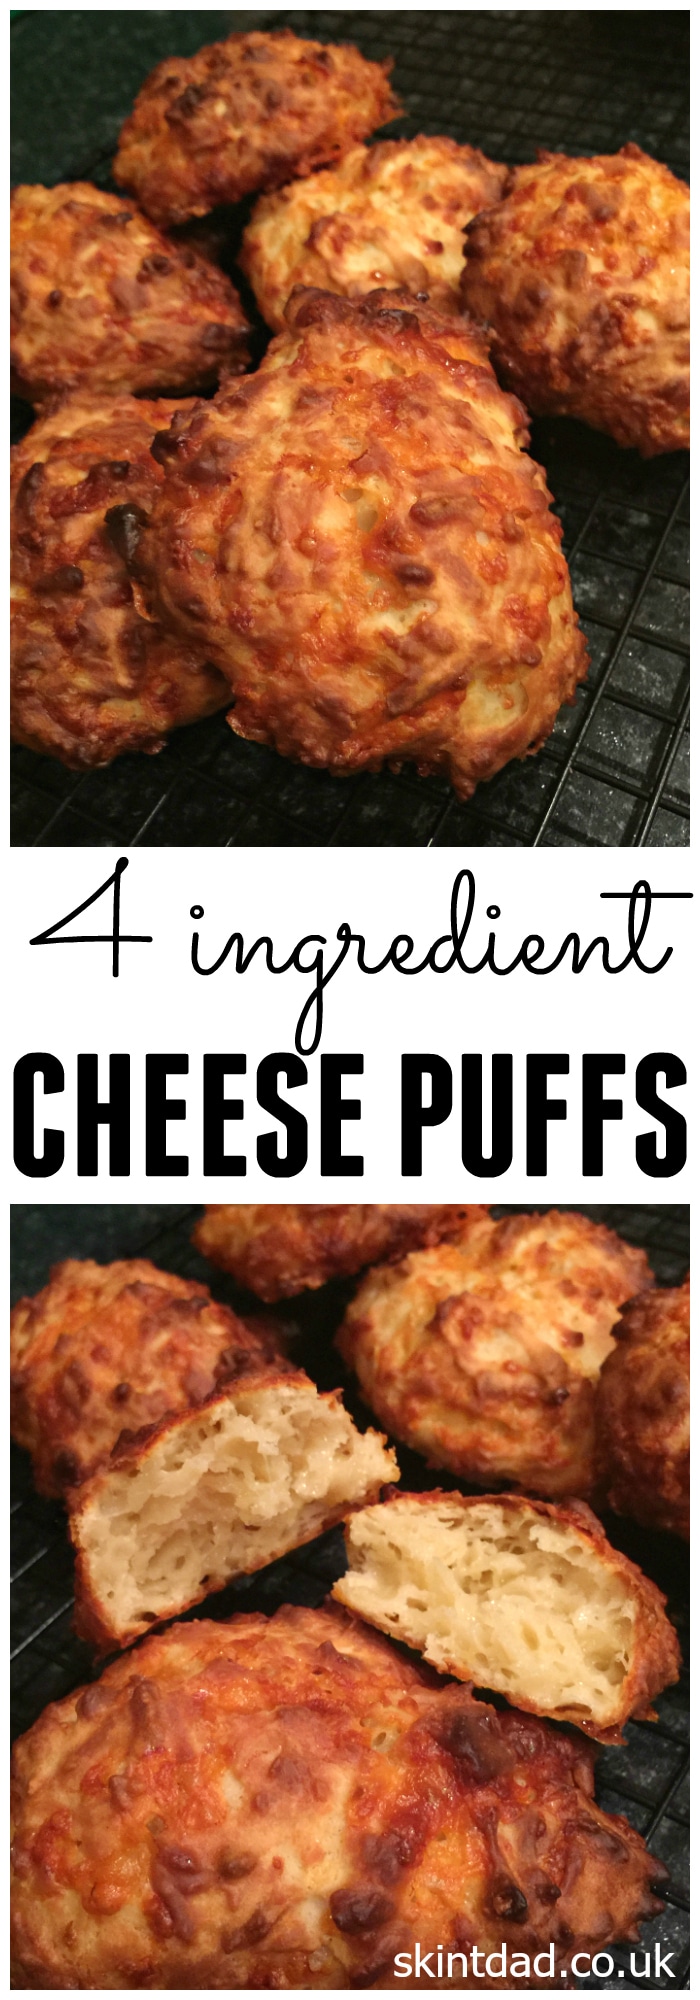 Whether you are after an easy snack, an alternative for the lunch box, a warm treat, or an extra with dinner then this Cheese Puffs recipe may just be for you!